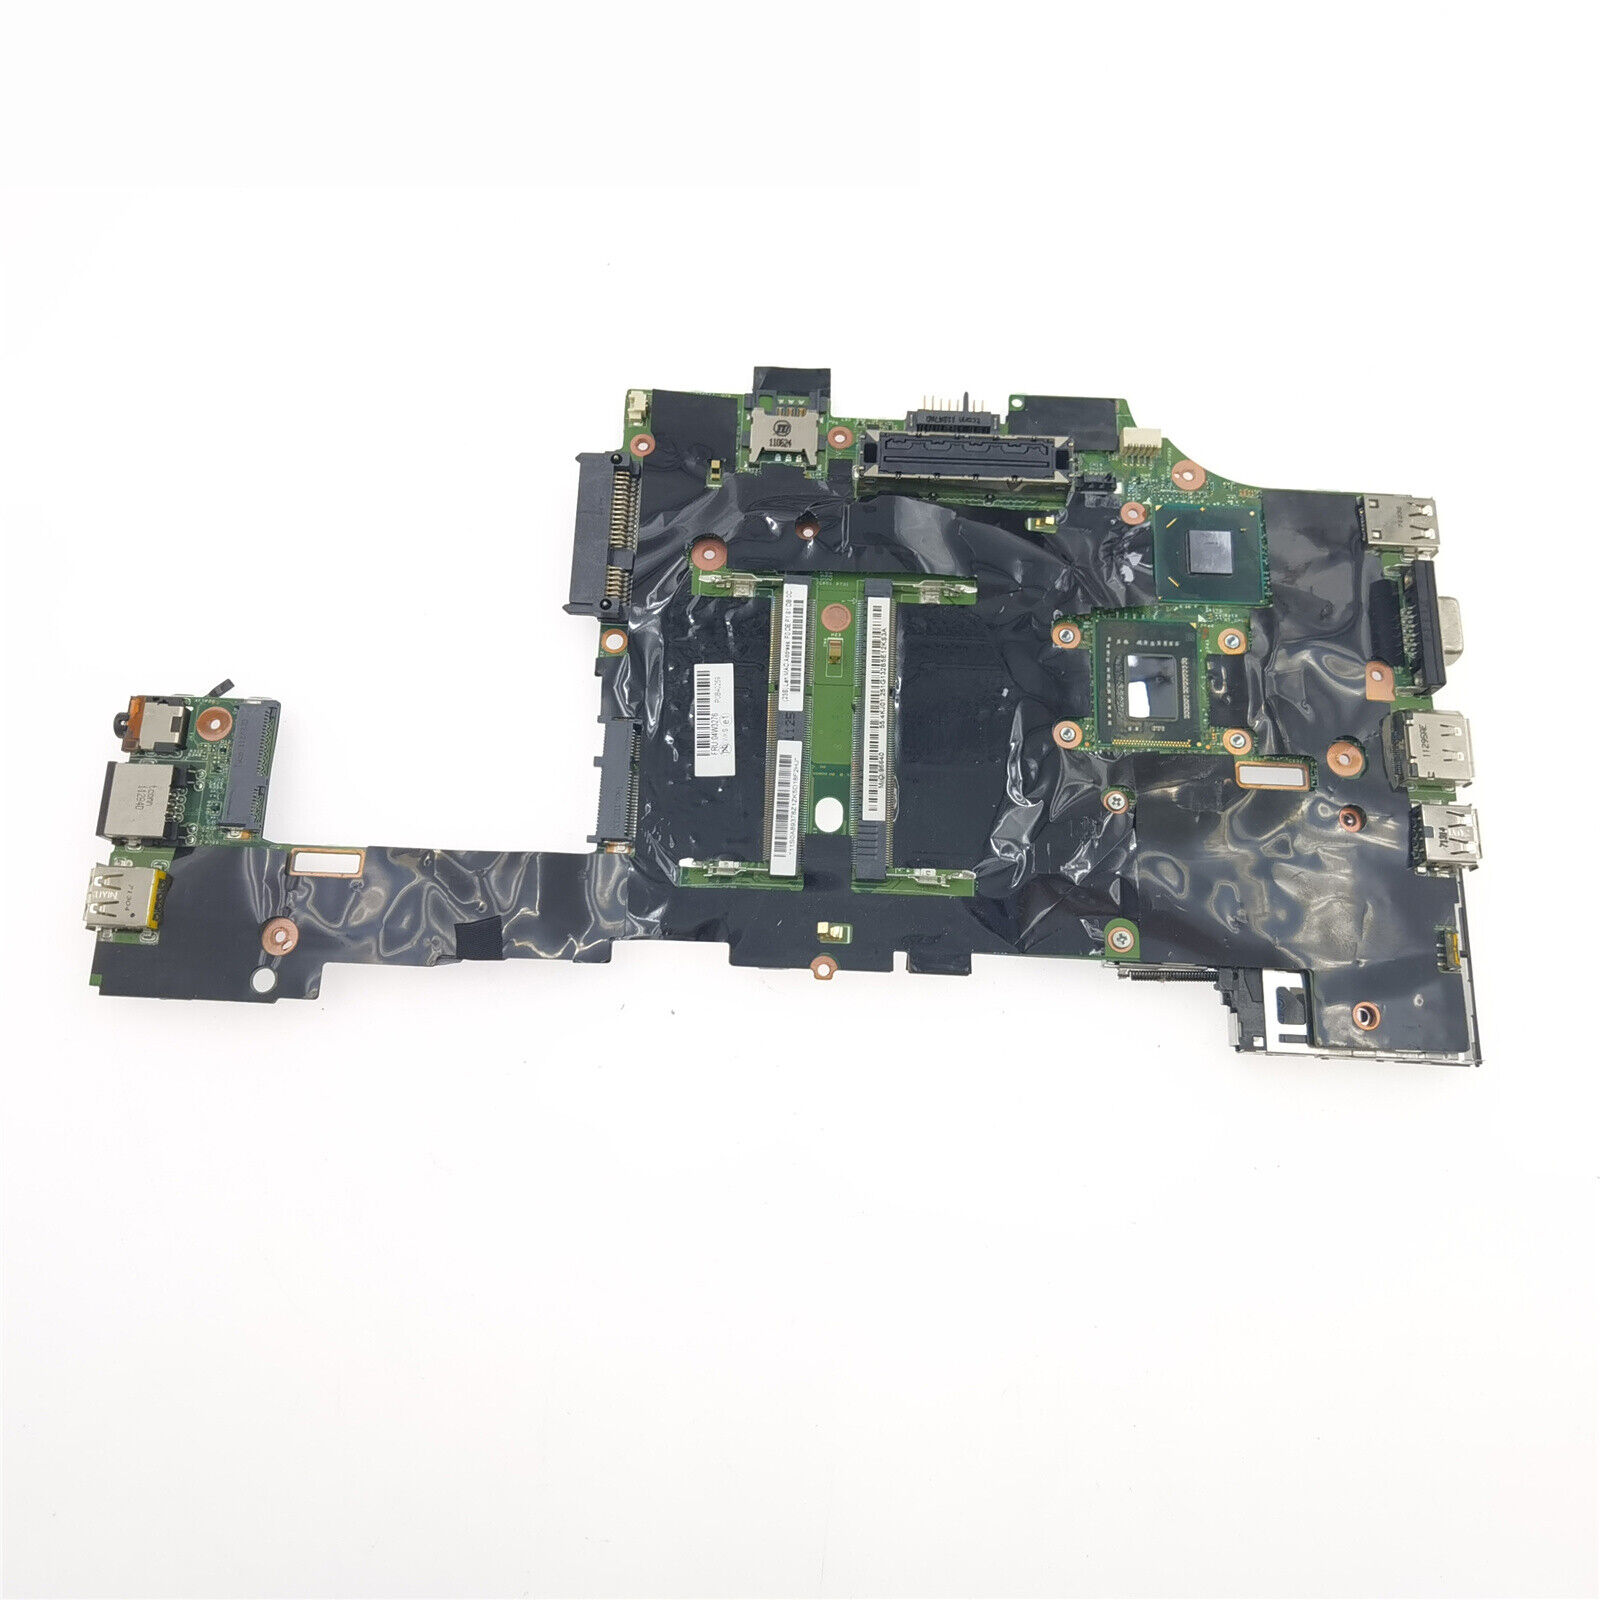 Motherboard For Lenovo Thinkpad X220T X220-Tablet With i5/i7 CPU H0227-3